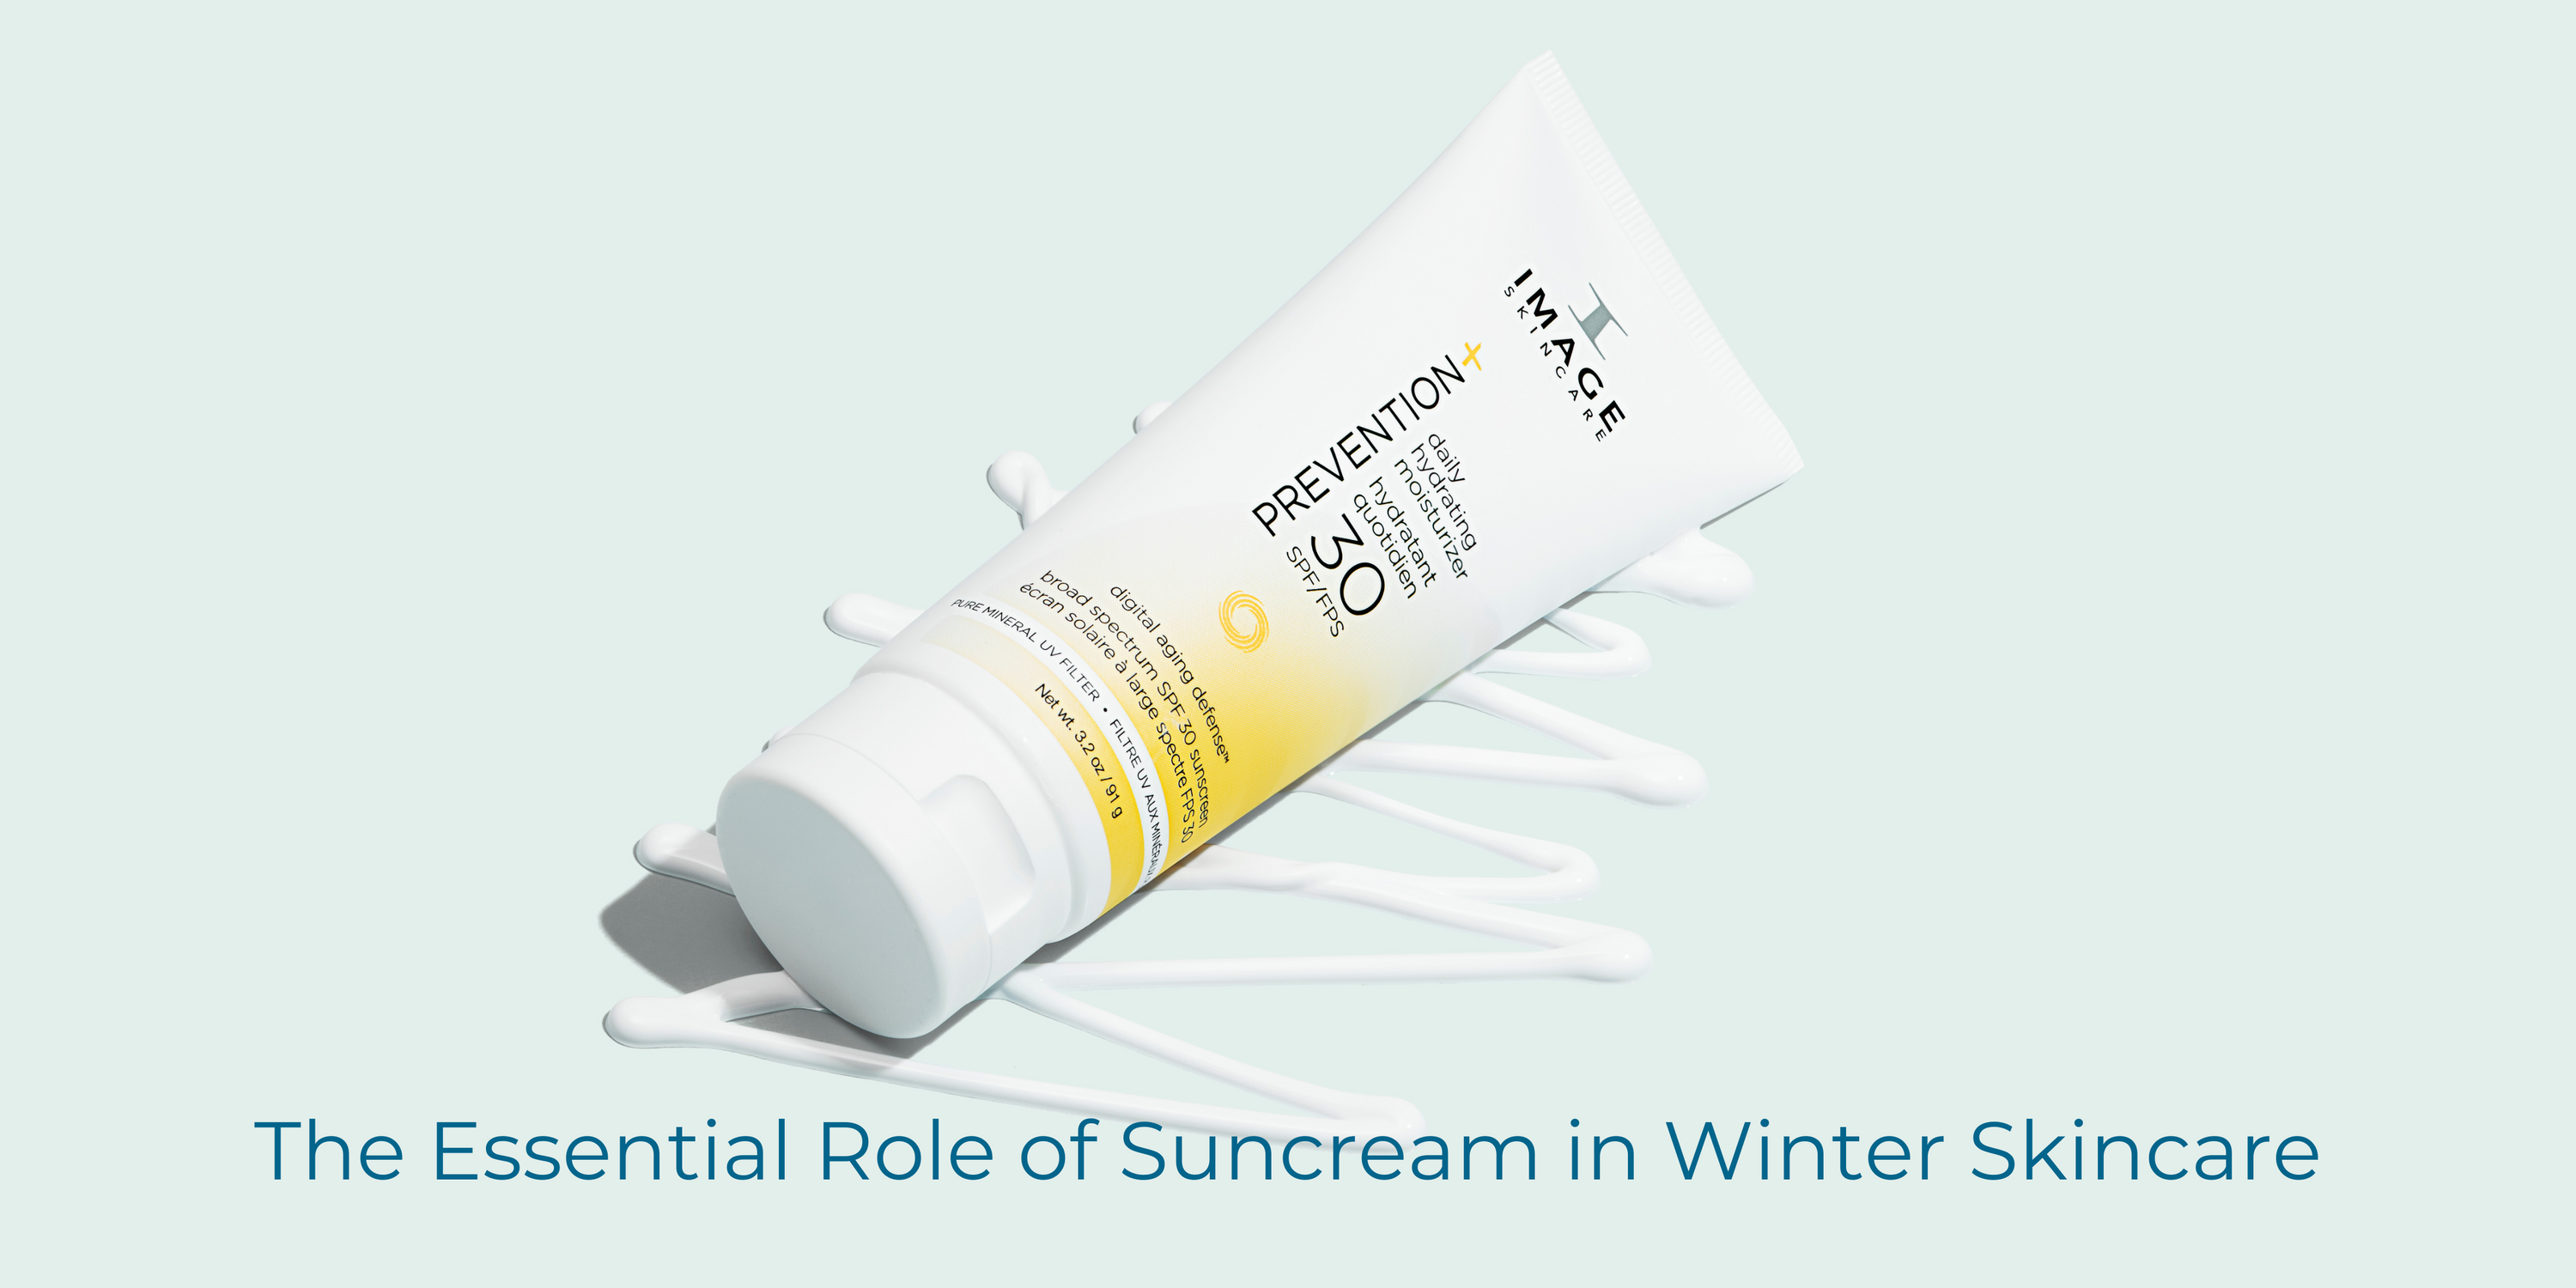 The Essential Role of Sunscreen in Winter Skincare